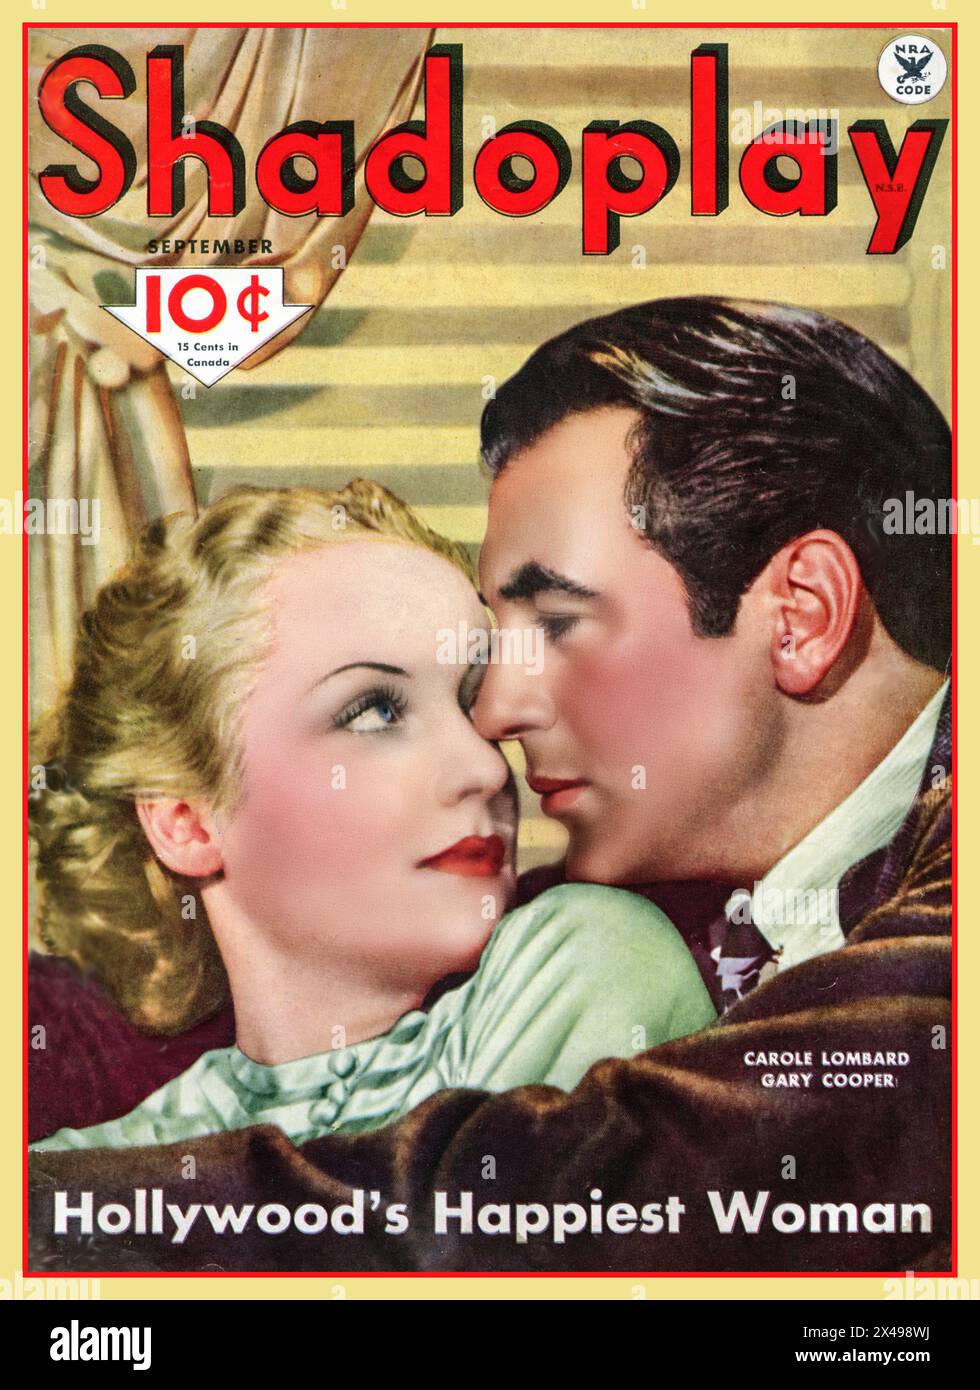 Shadoplay Vintage Hollywood Movie Film Gossip Magazine (Sept. 1934) featuring Carole Lombard and Gary Cooper on the front cover, with the caption 'Hollywood's Happiest Woman'  A promotion portrait for 'Now and Forever'  a 1934 American drama film directed by Henry Hathaway. The screenplay by Vincent Lawrence and Sylvia Thalberg was based on the story 'Honor Bright' by Jack Kirkland and Melville Baker. The film stars Gary Cooper, Carole Lombard, and Shirley Temple in a story about a small-time swindler going straight for his child's sake. Hollywood USA Stock Photo